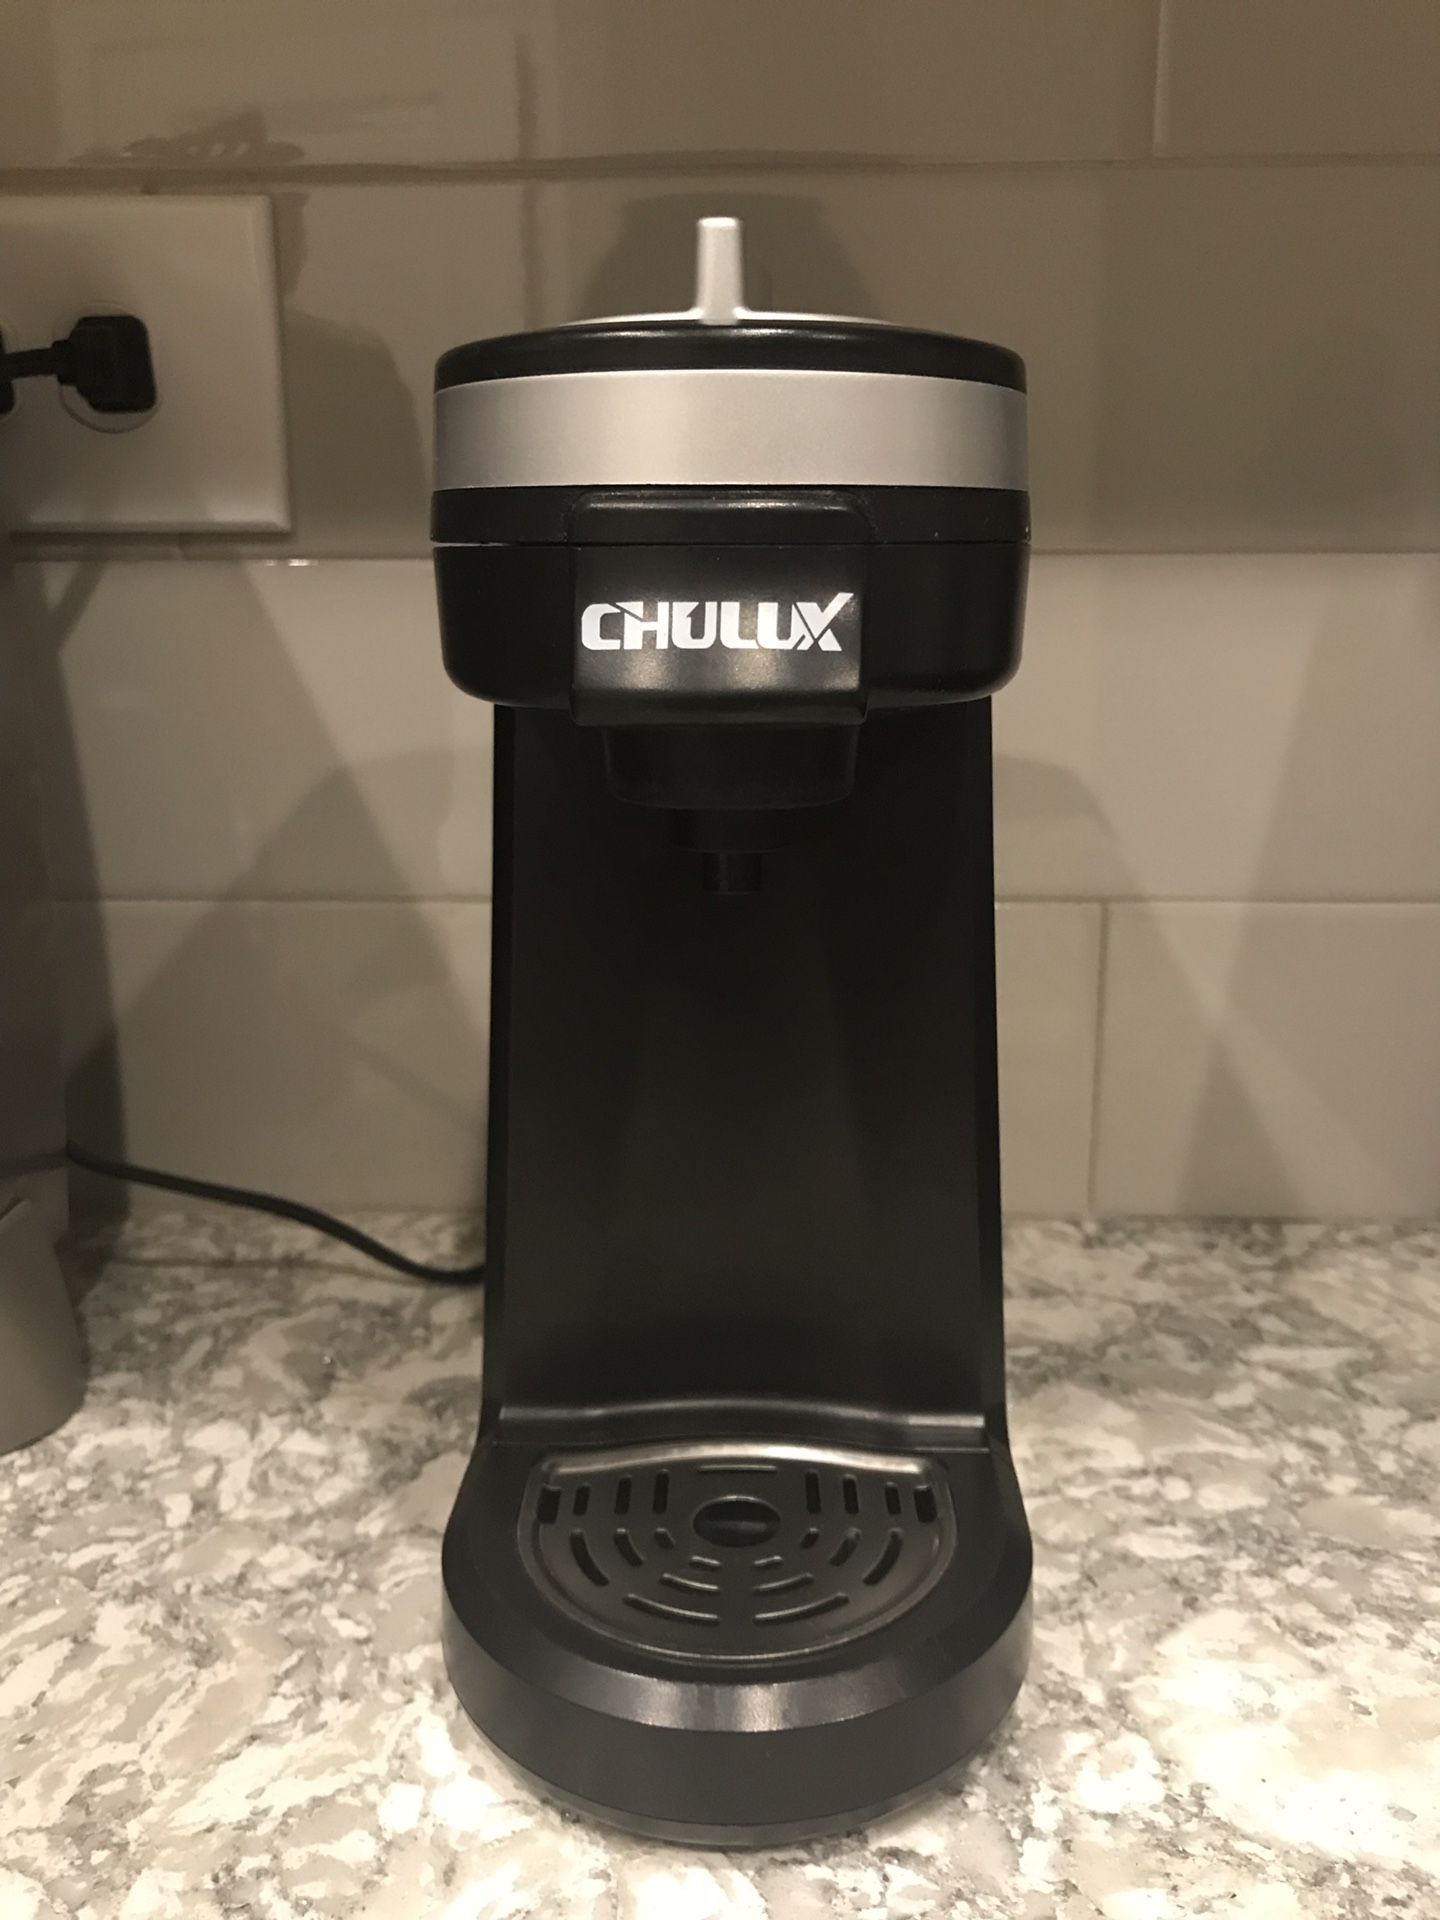 Coffee maker single serve/ (Chulux) make/ works great from a clean and smoke free home.